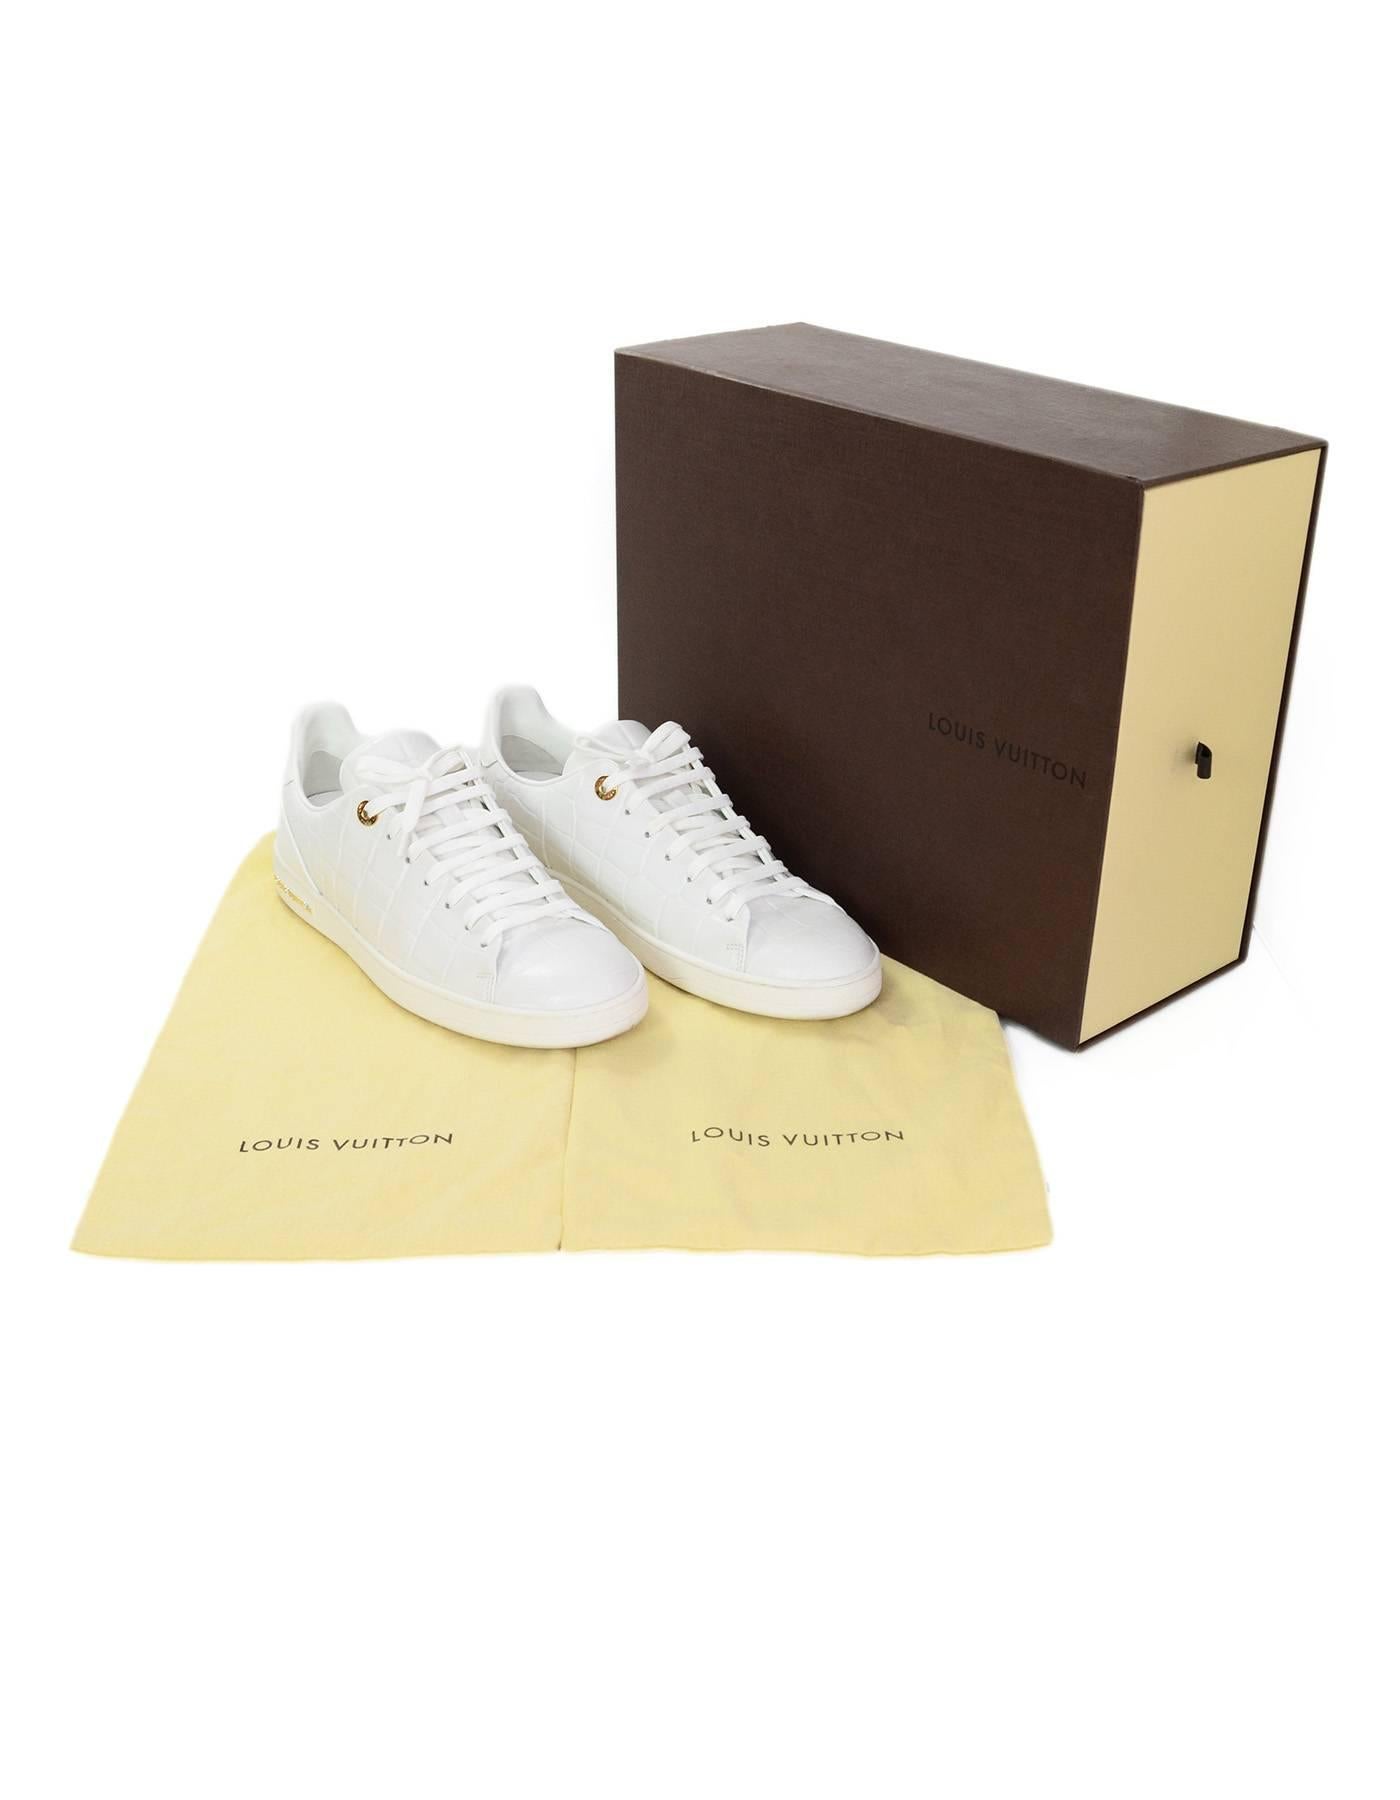 Louis Vuitton White Croc Embossed Leather Frontrow Sneakers Sz 38.5 1